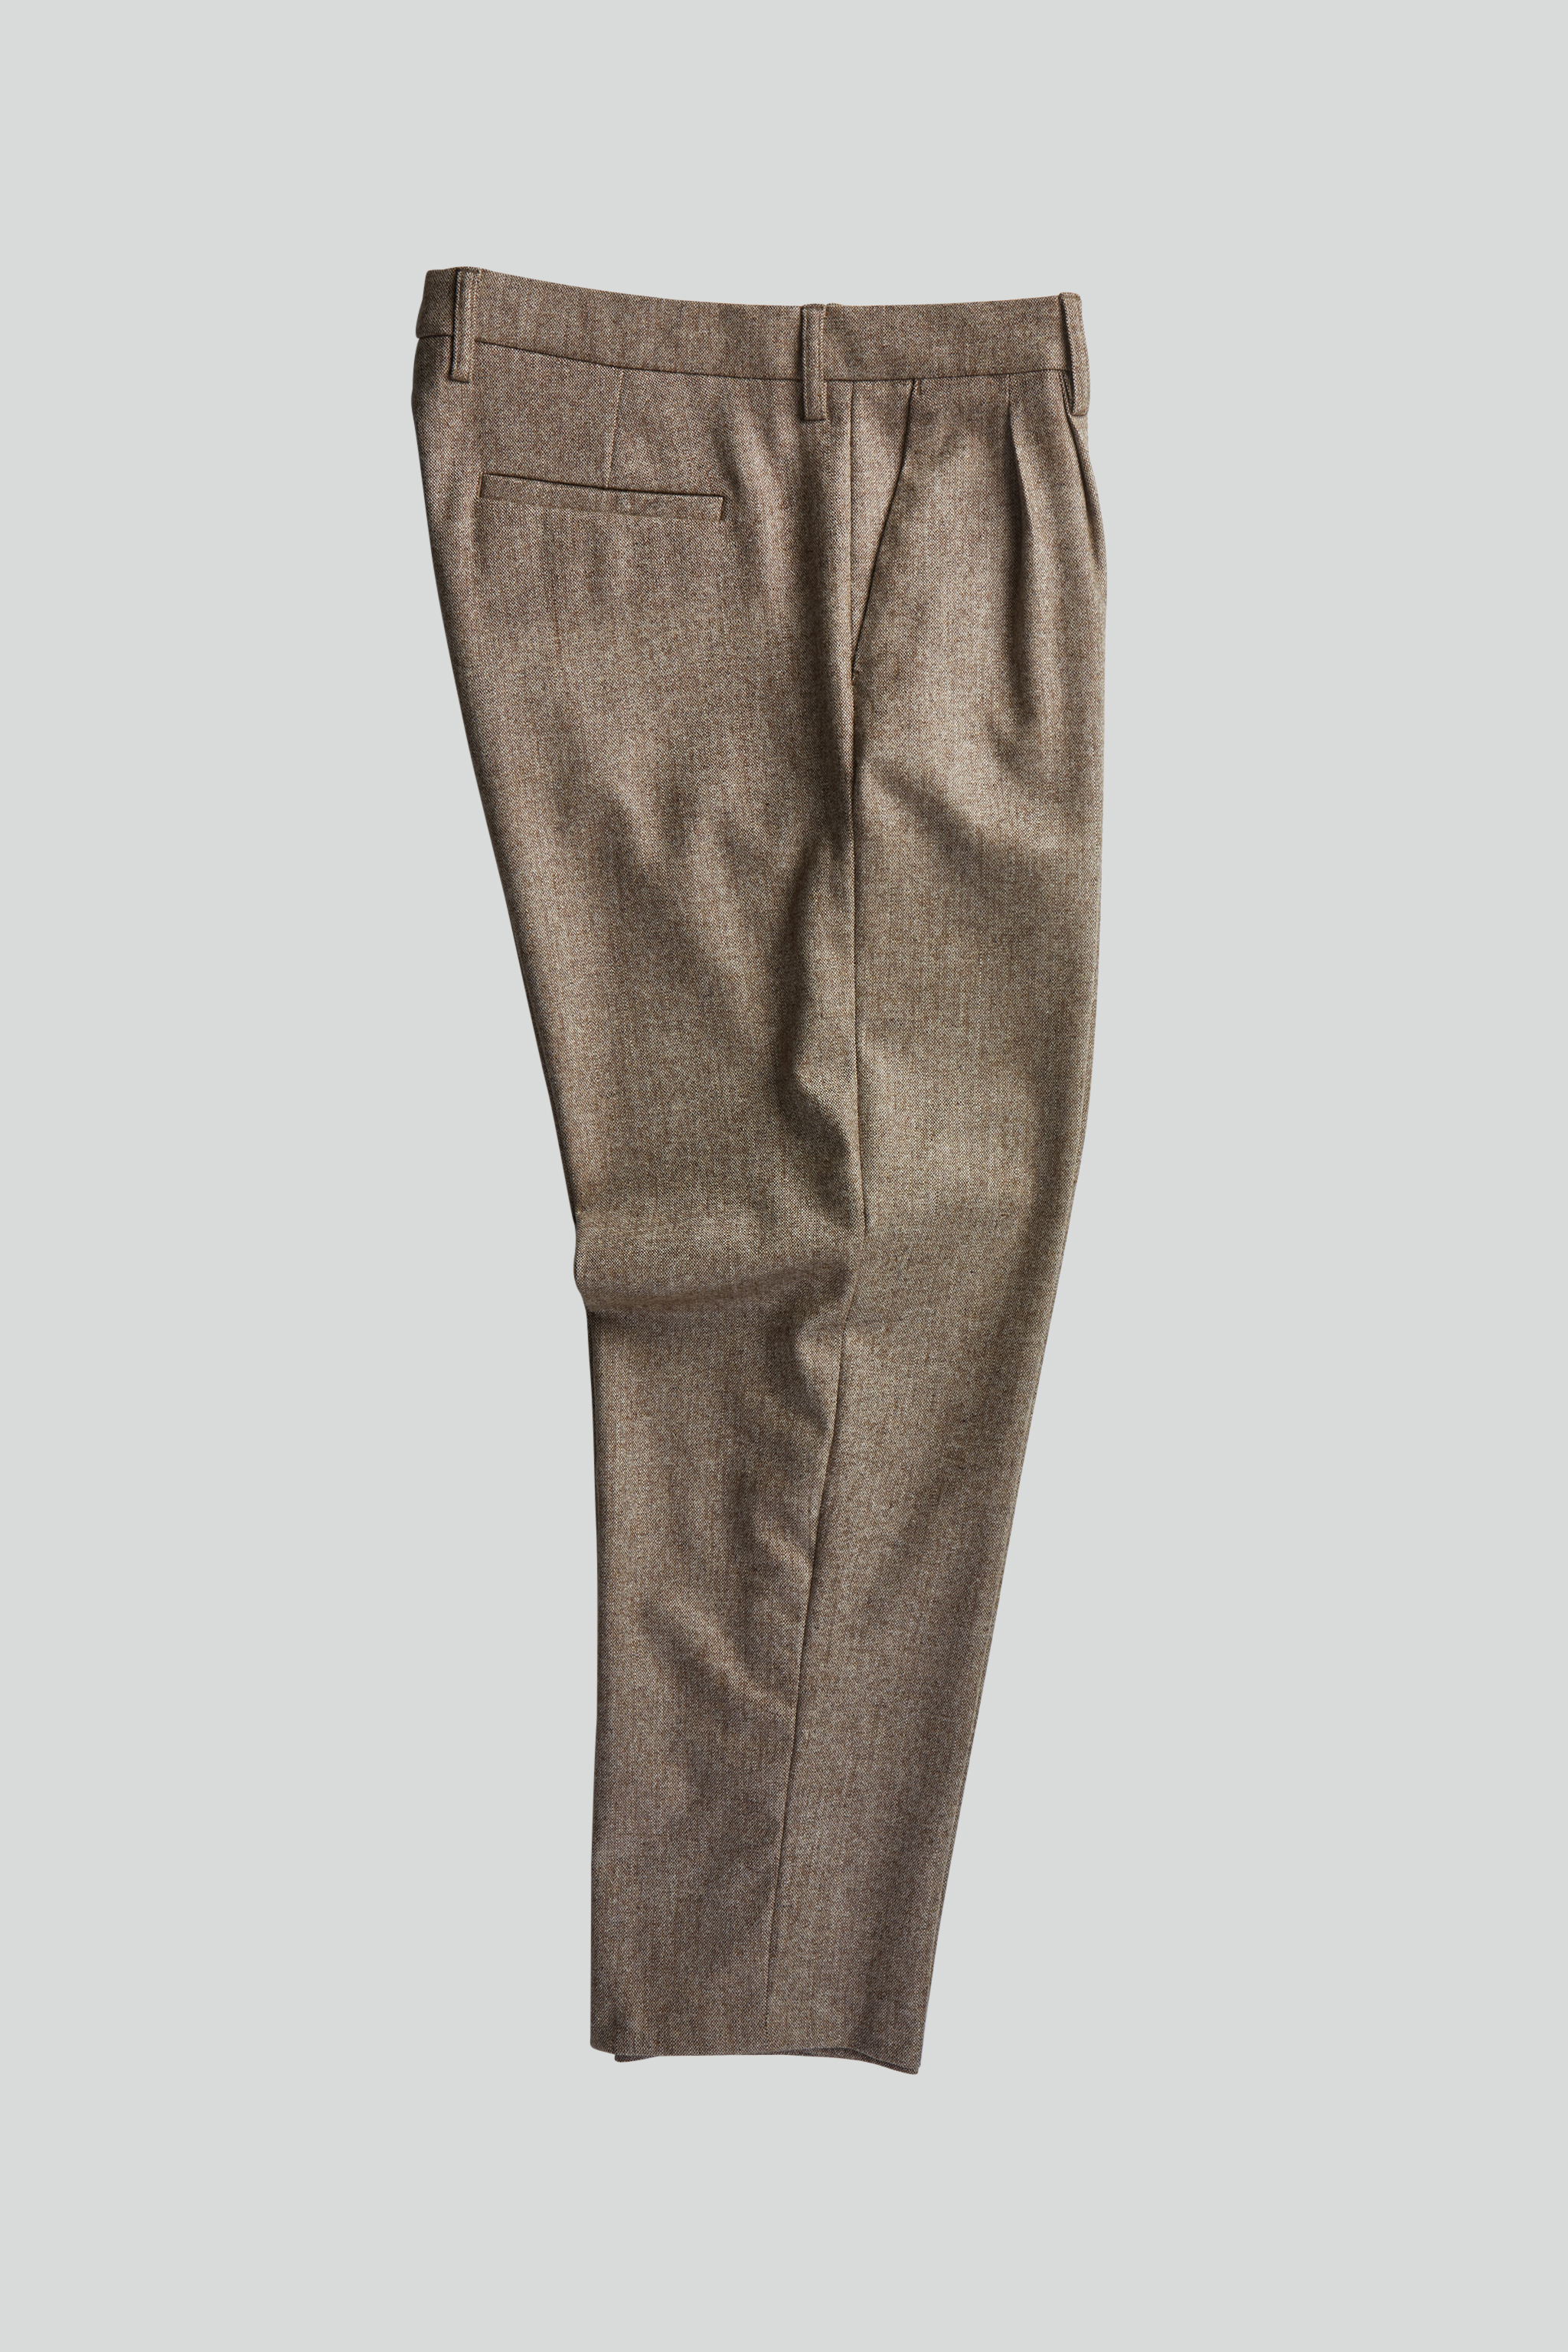 NN07 + Throwing Fits Paw 1799 Straight-Leg Tweed Trousers for Men